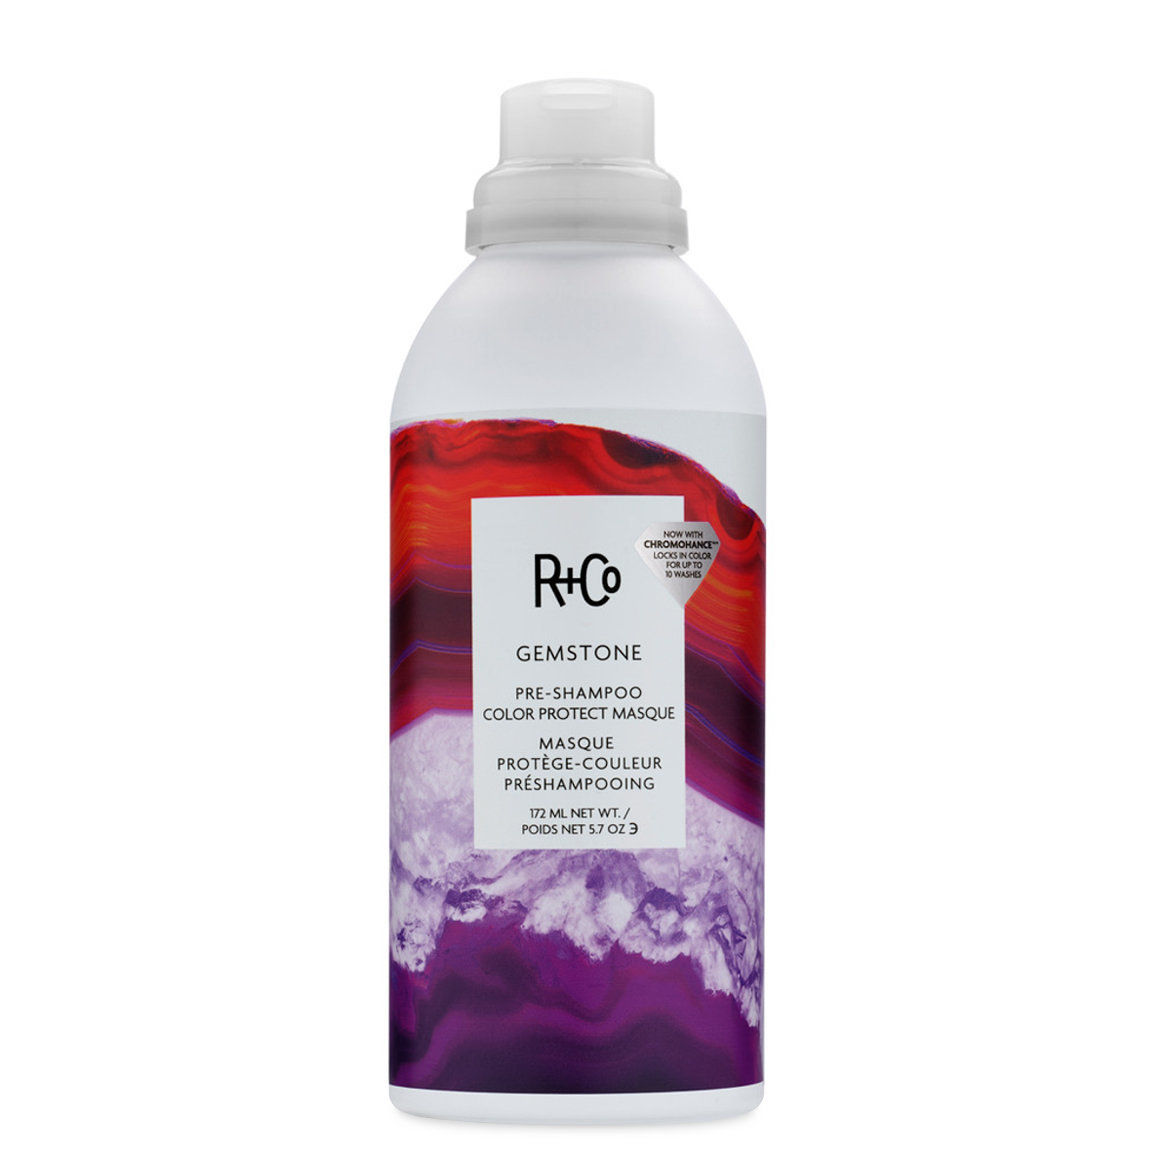 R+Co Gemstone Pre-Shampoo Color Protect Masque alternative view 1 - product swatch.